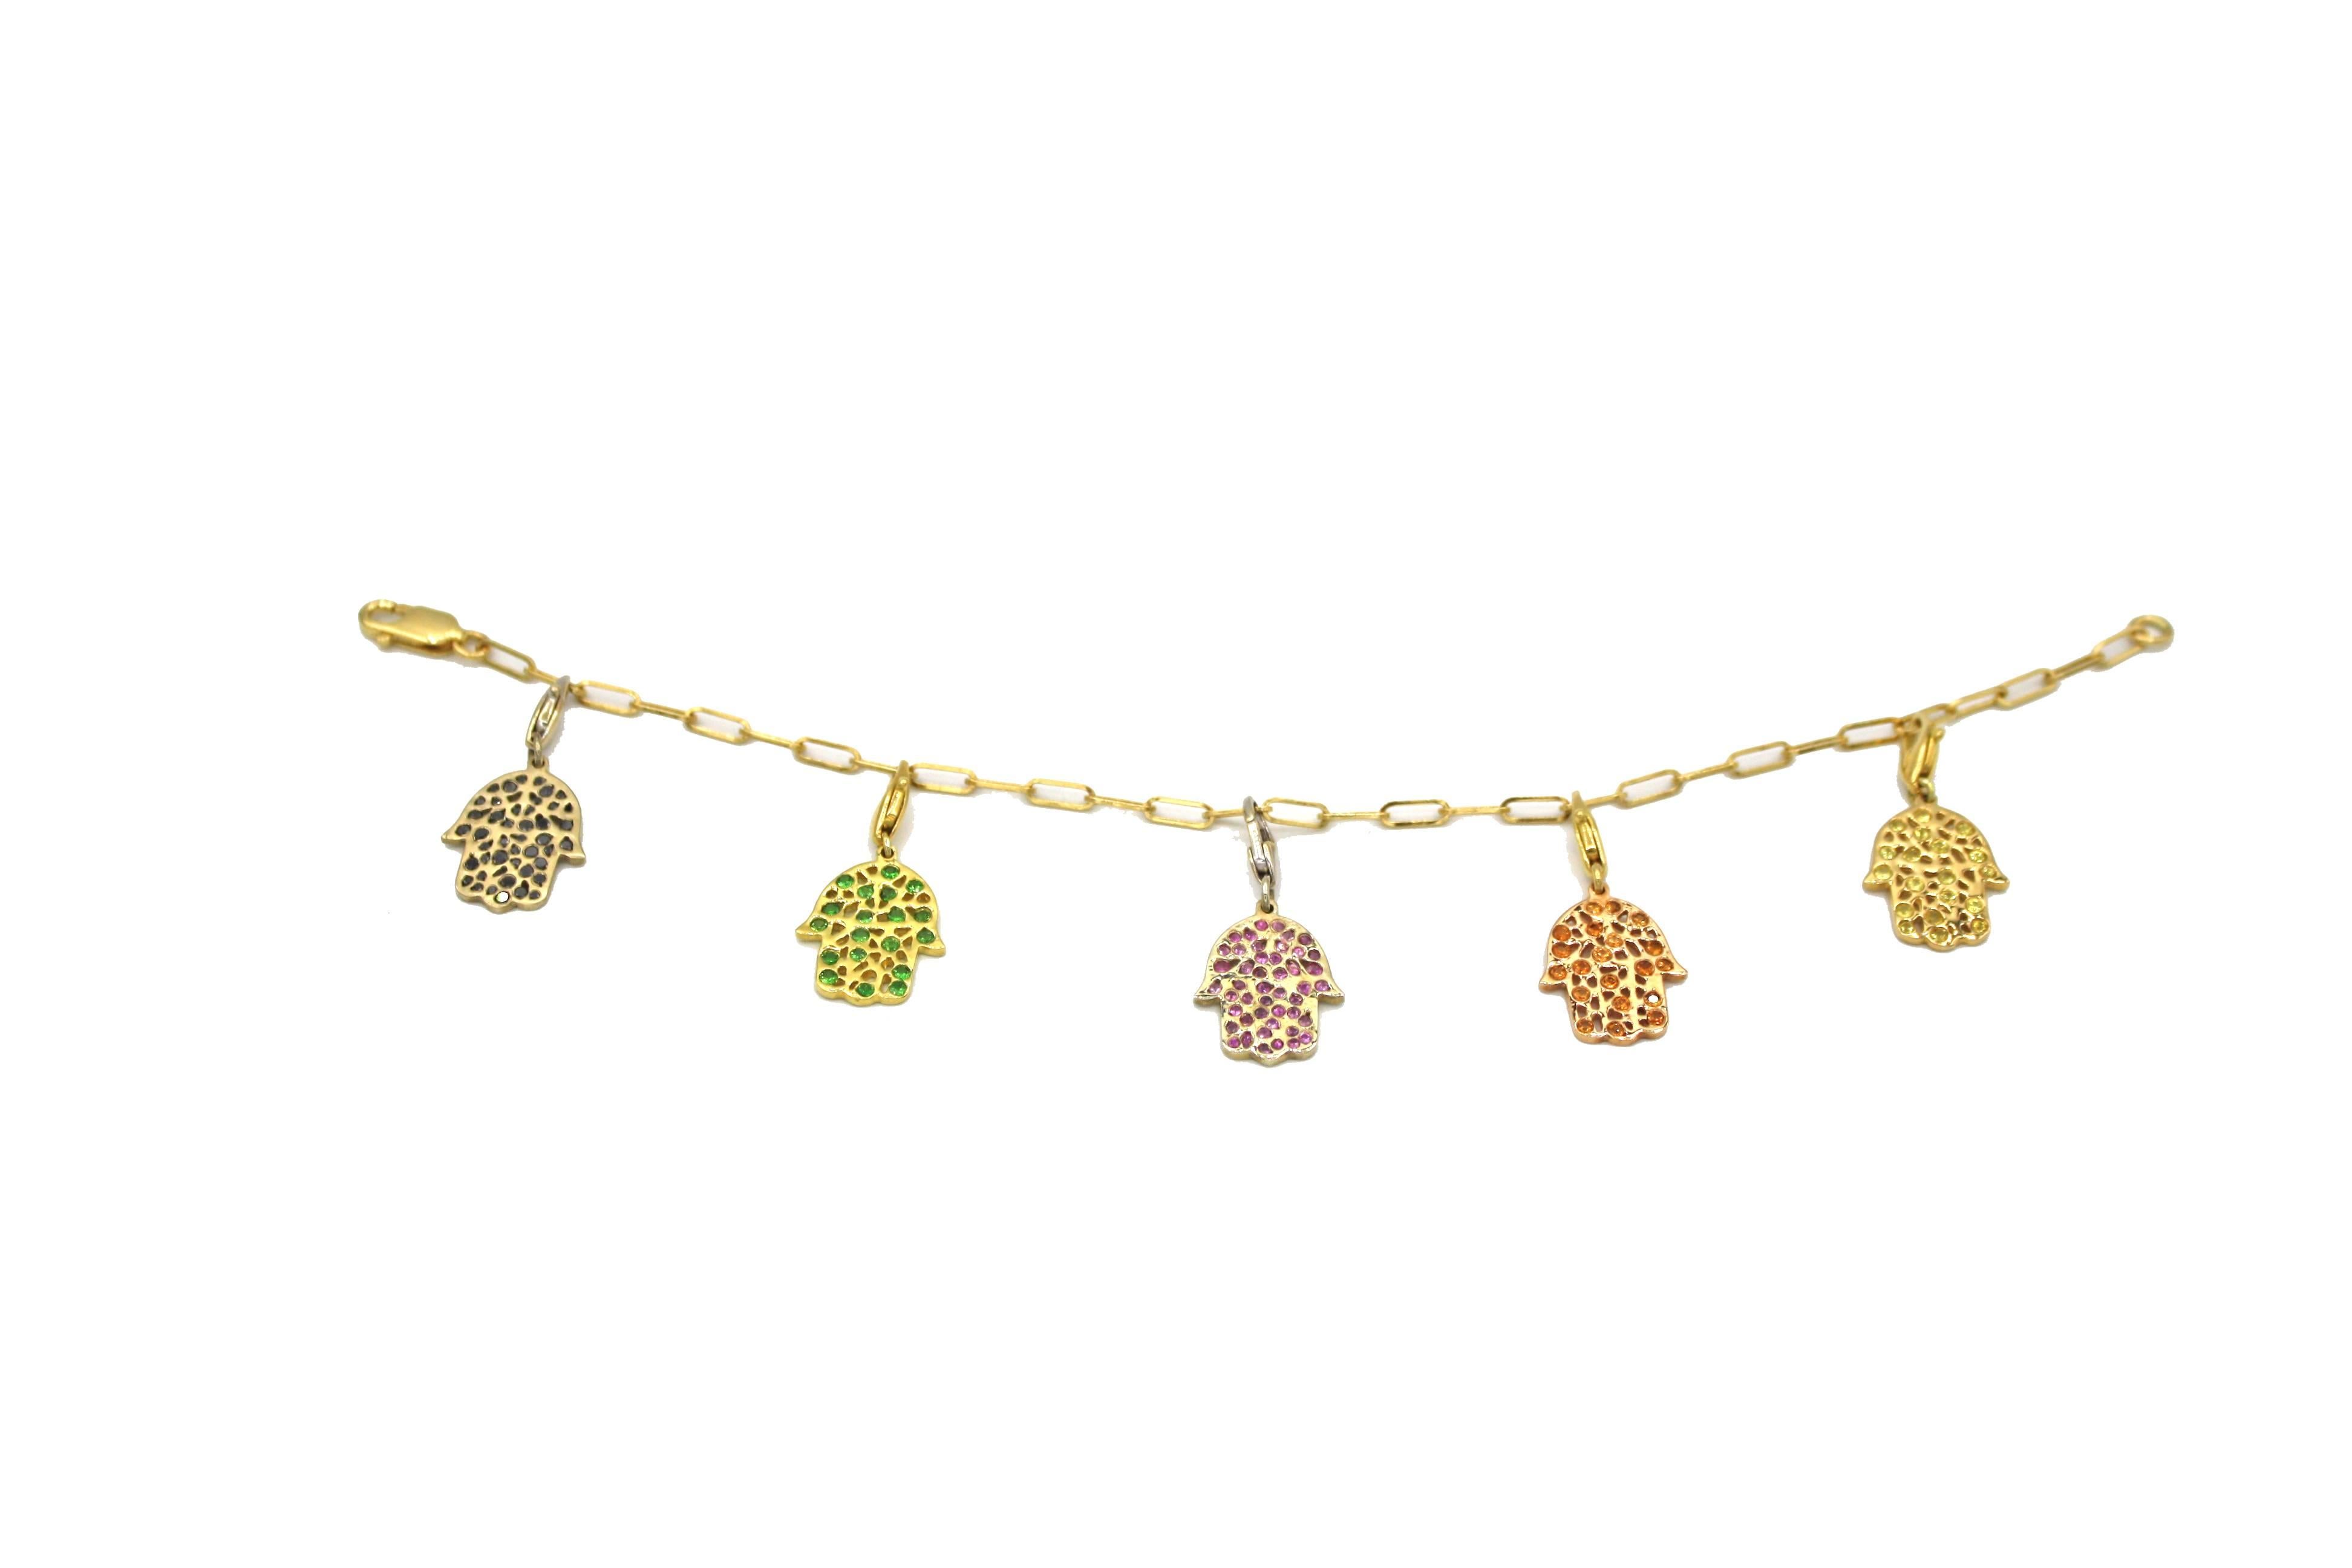 This chic 18k gold charm bracelet includes 5 white and yellow gold Hamsa hand charms with Pink, Yellow, Green, and Orange Sapphires as well as one with Black Diamonds. Each charm is removable and can be rearranged however the wearer would like.